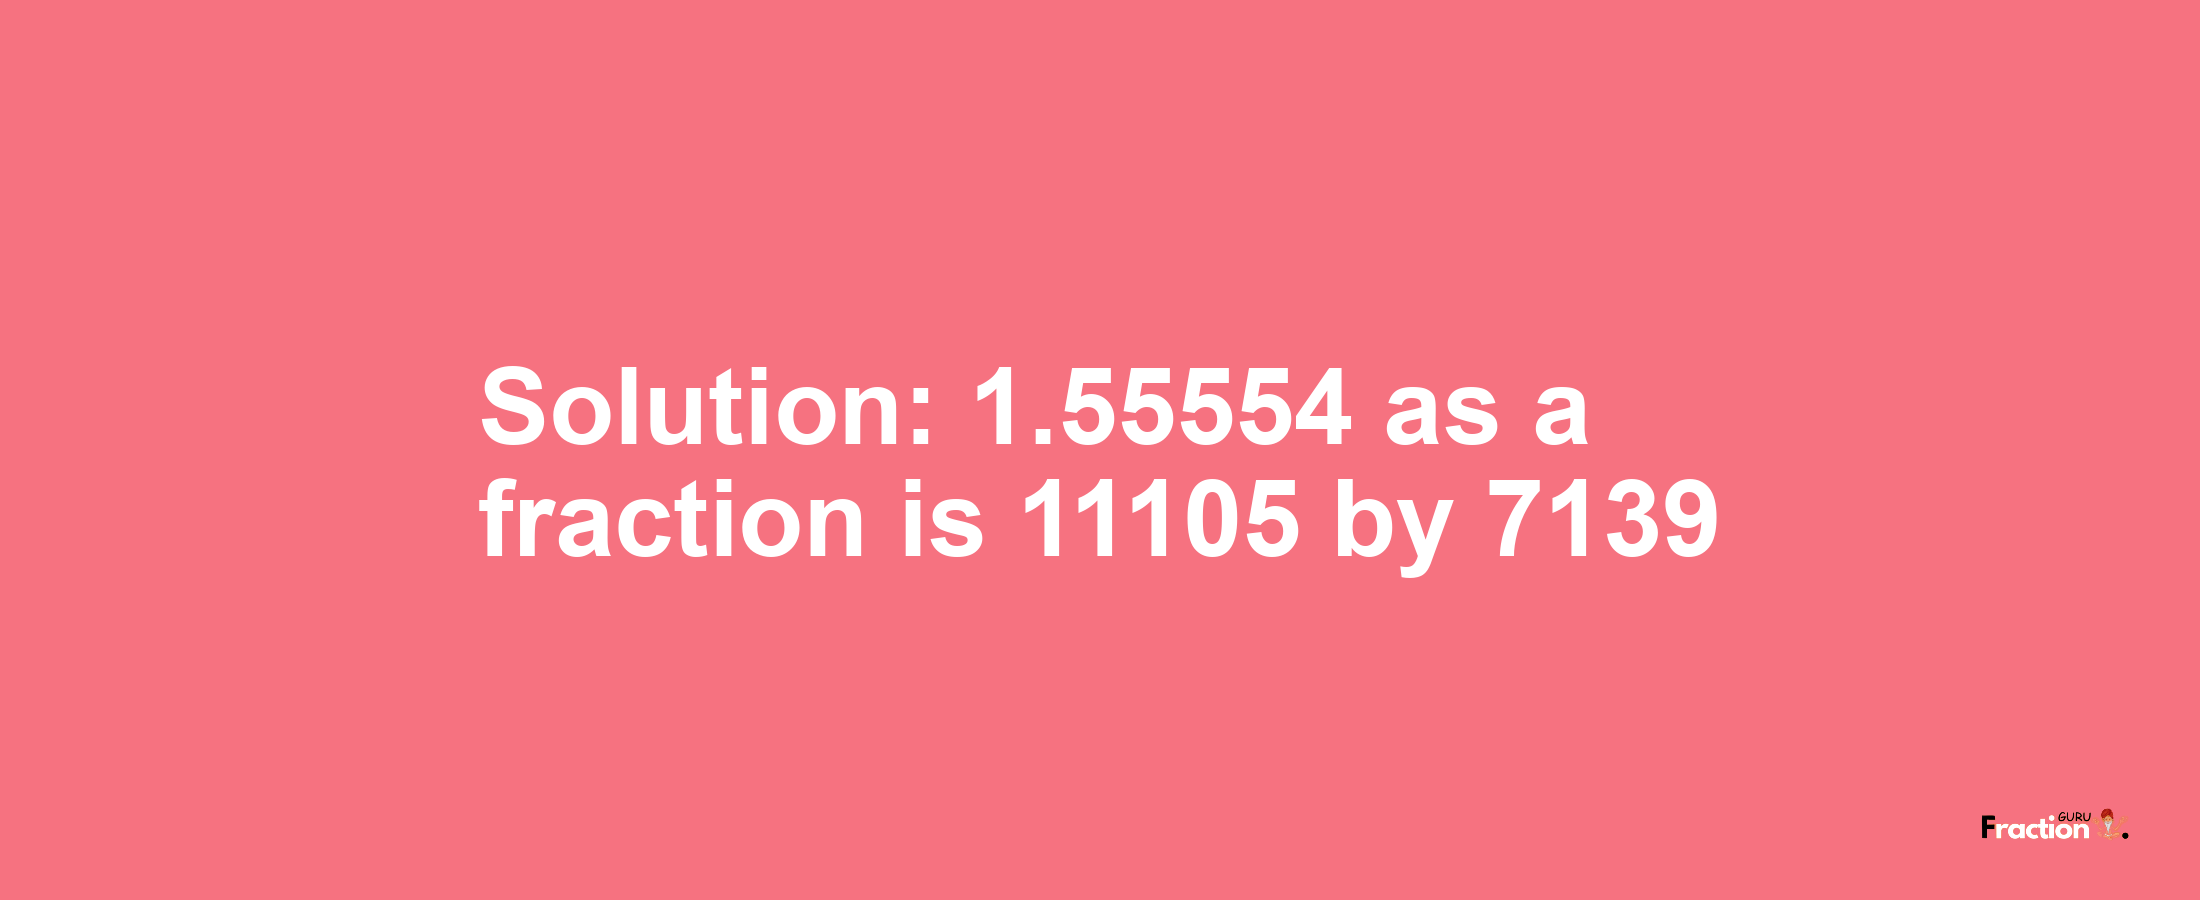 Solution:1.55554 as a fraction is 11105/7139